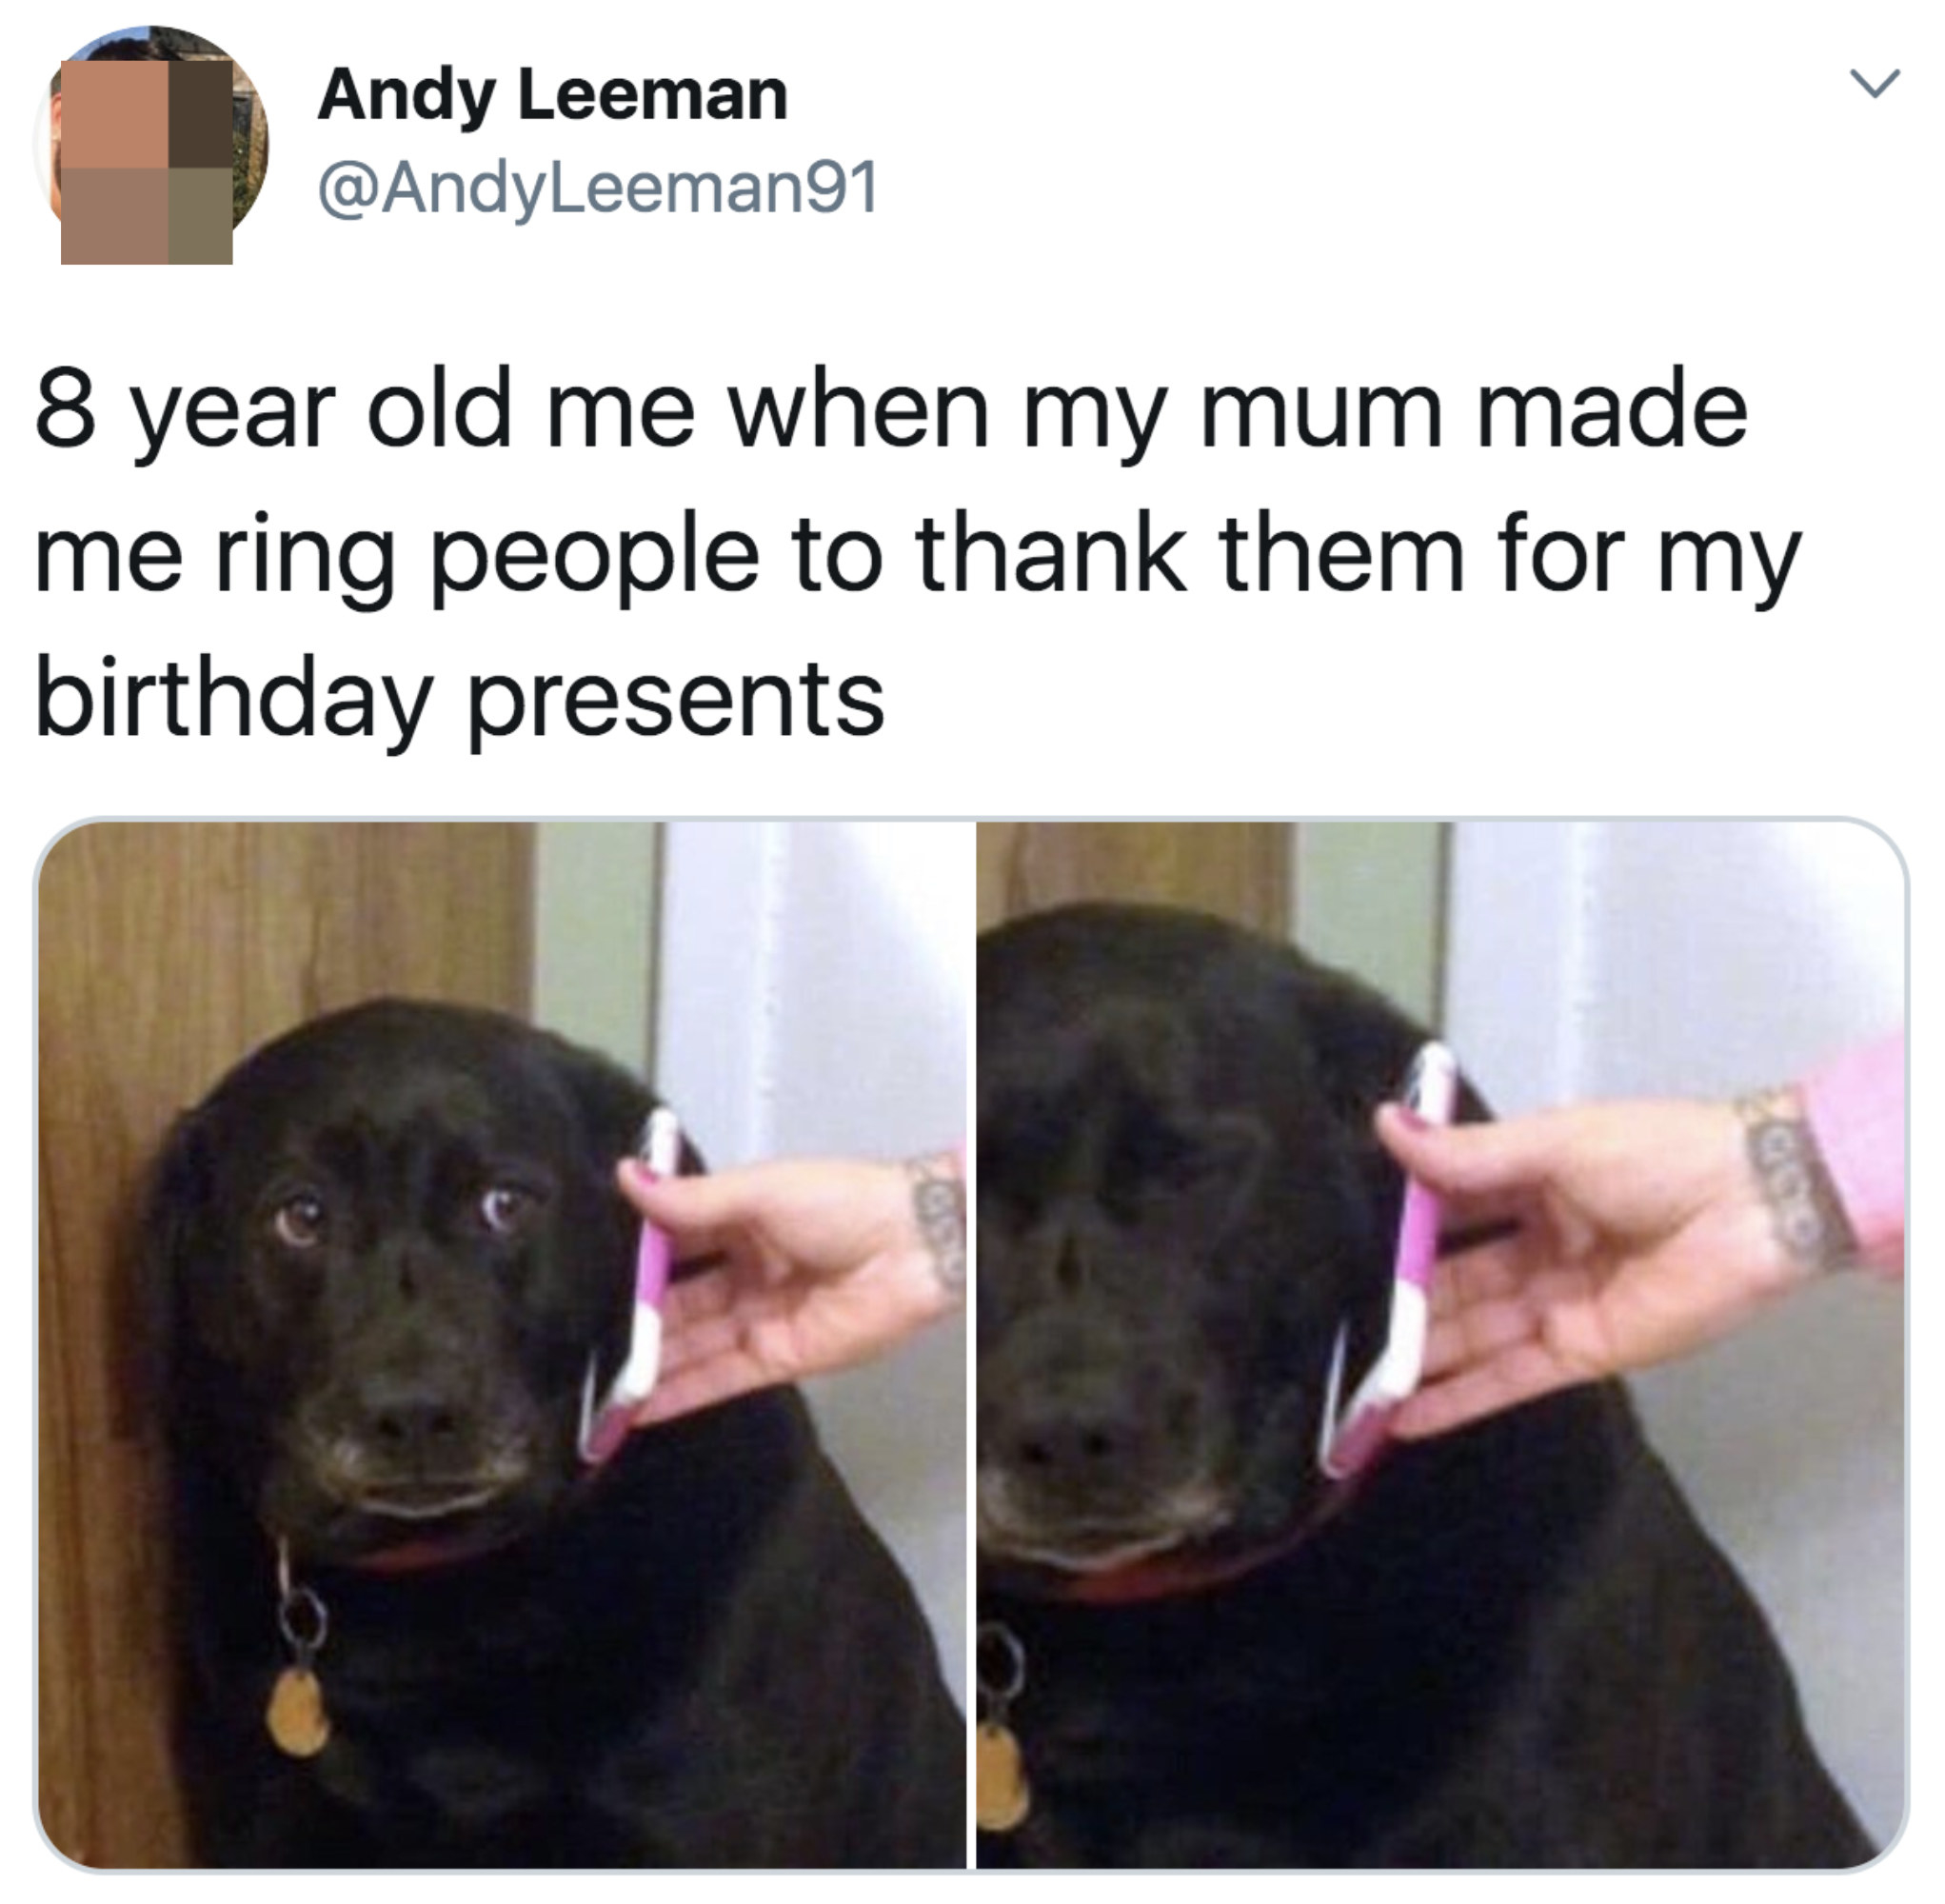 Tweet with a nervous-looking dog reading &quot;8-year-old me when my mum made me ring people to thank them for my birthday presents&quot;